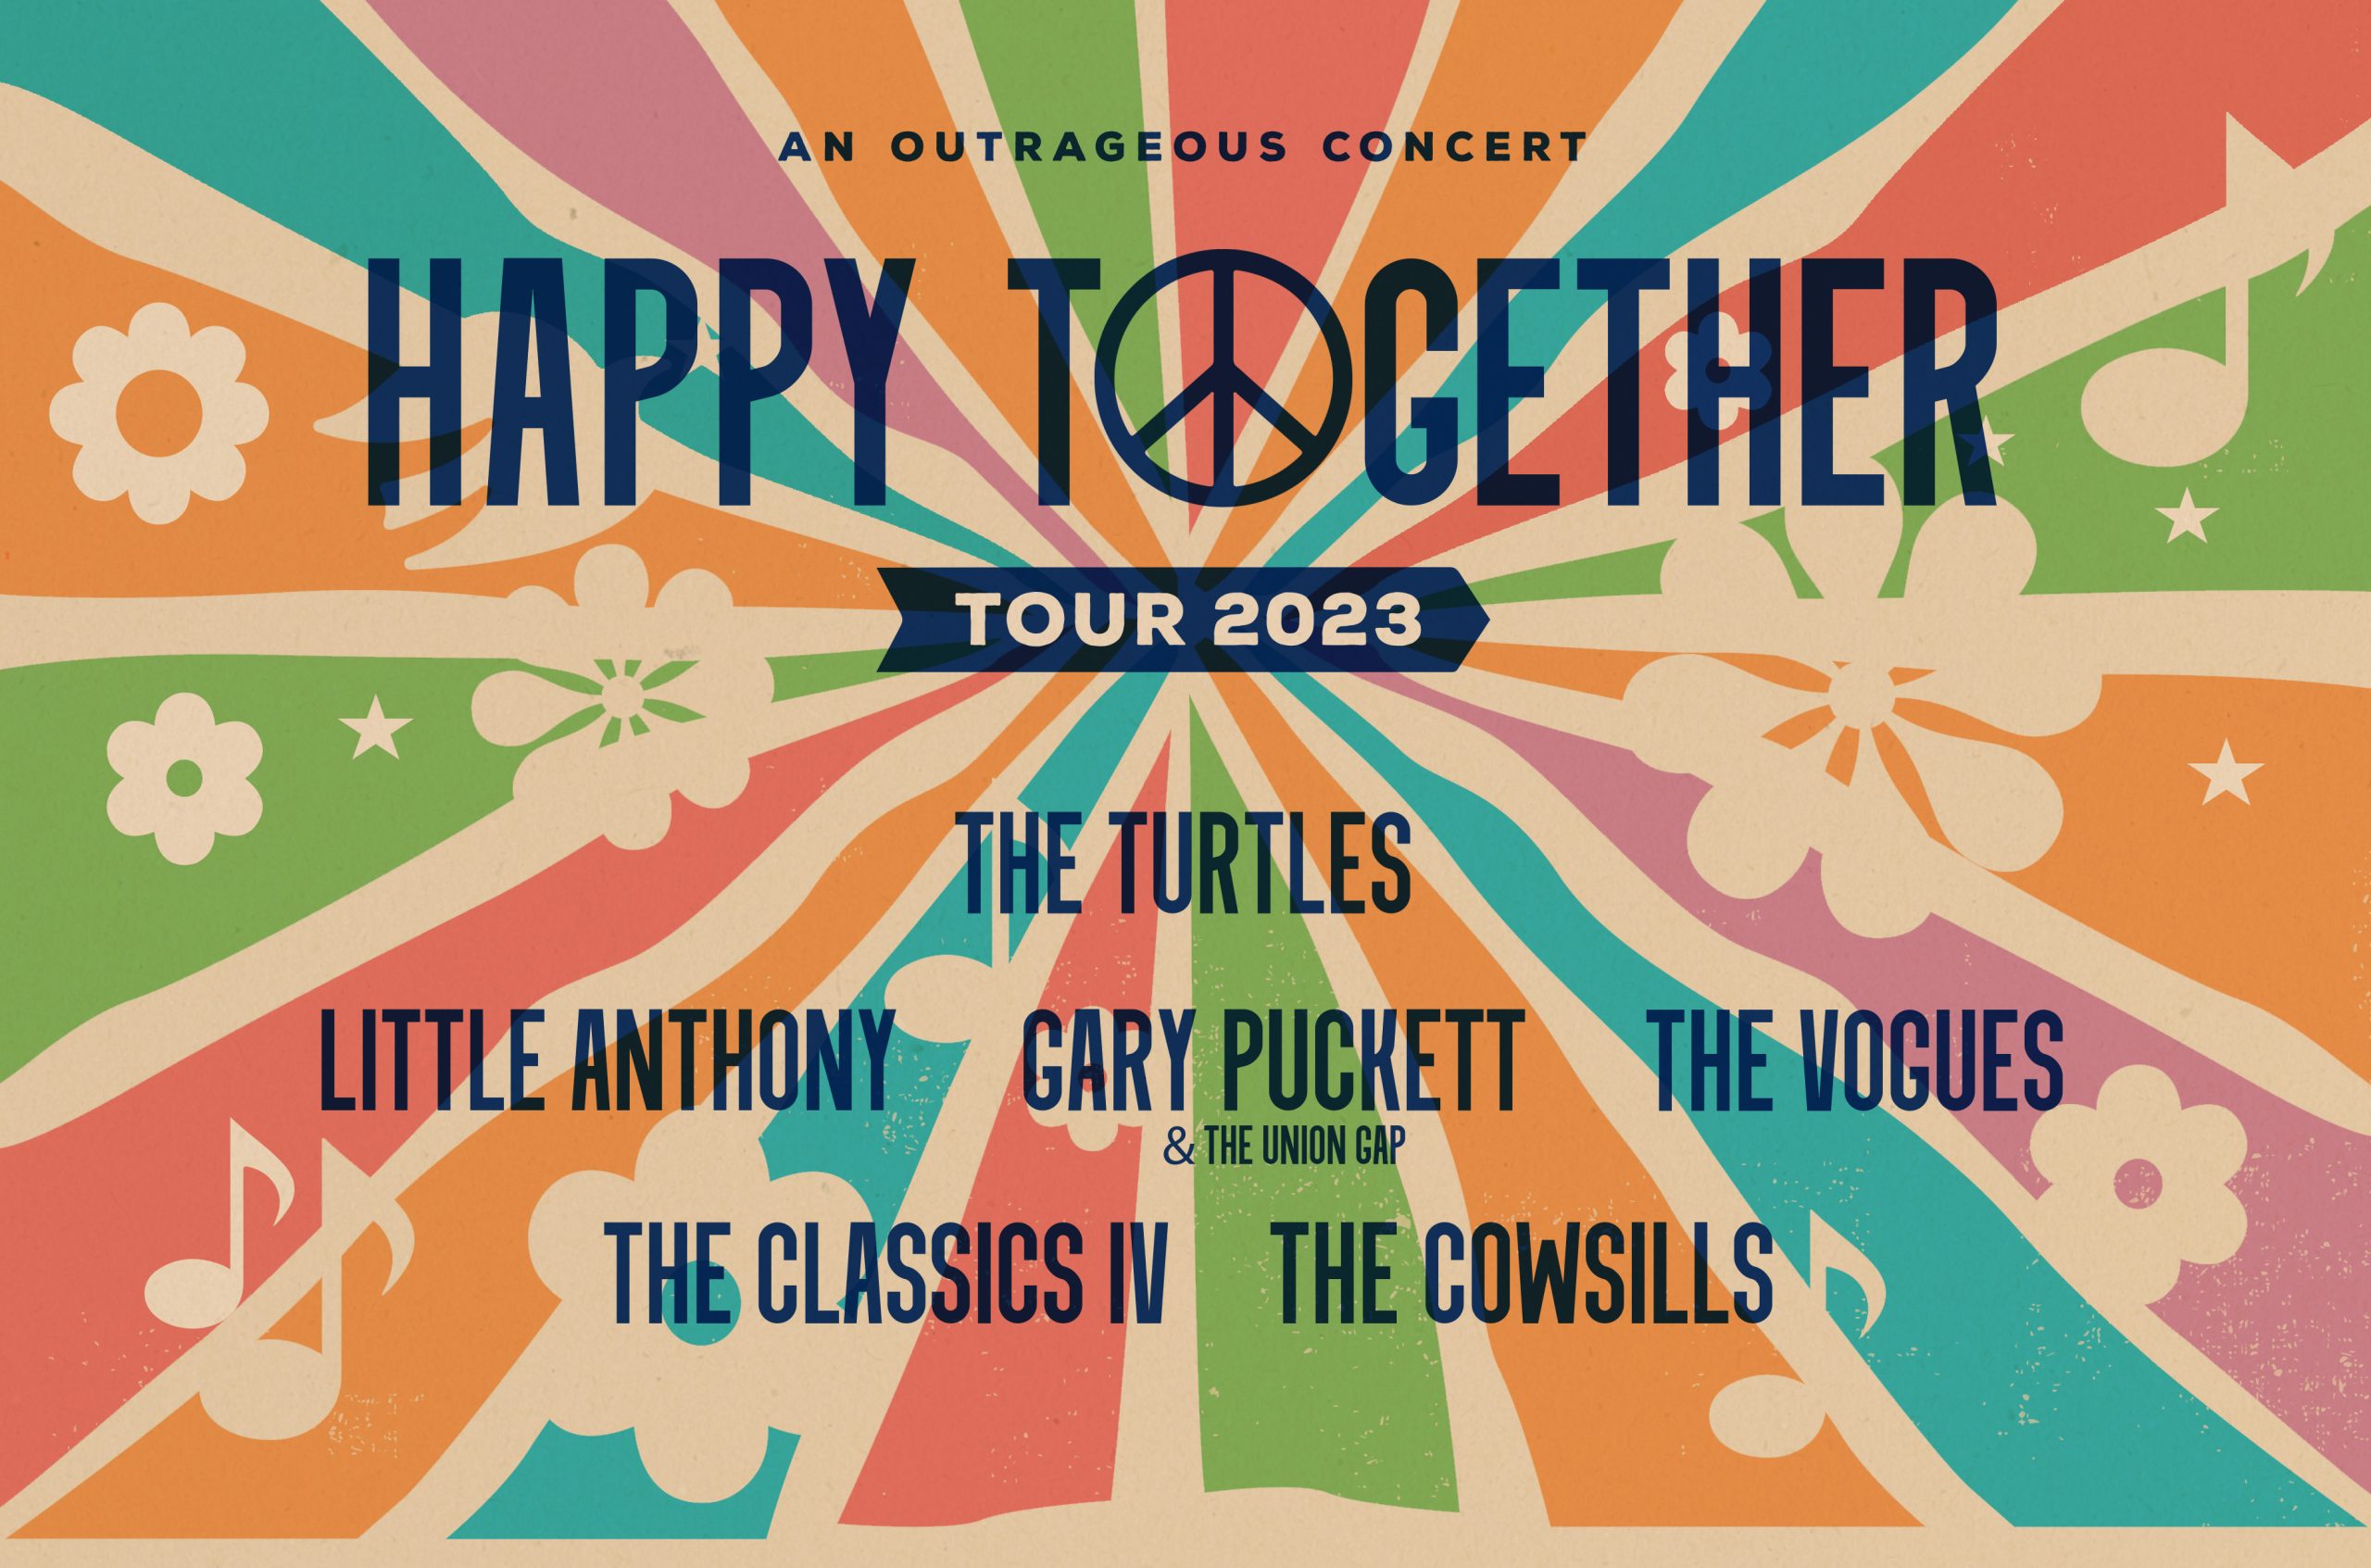 Happy Together Tour: The Turtles, Little Anthony, Gary Puckett and The Union Gap & The Vogues at Hackensack Meridian Health Theatre